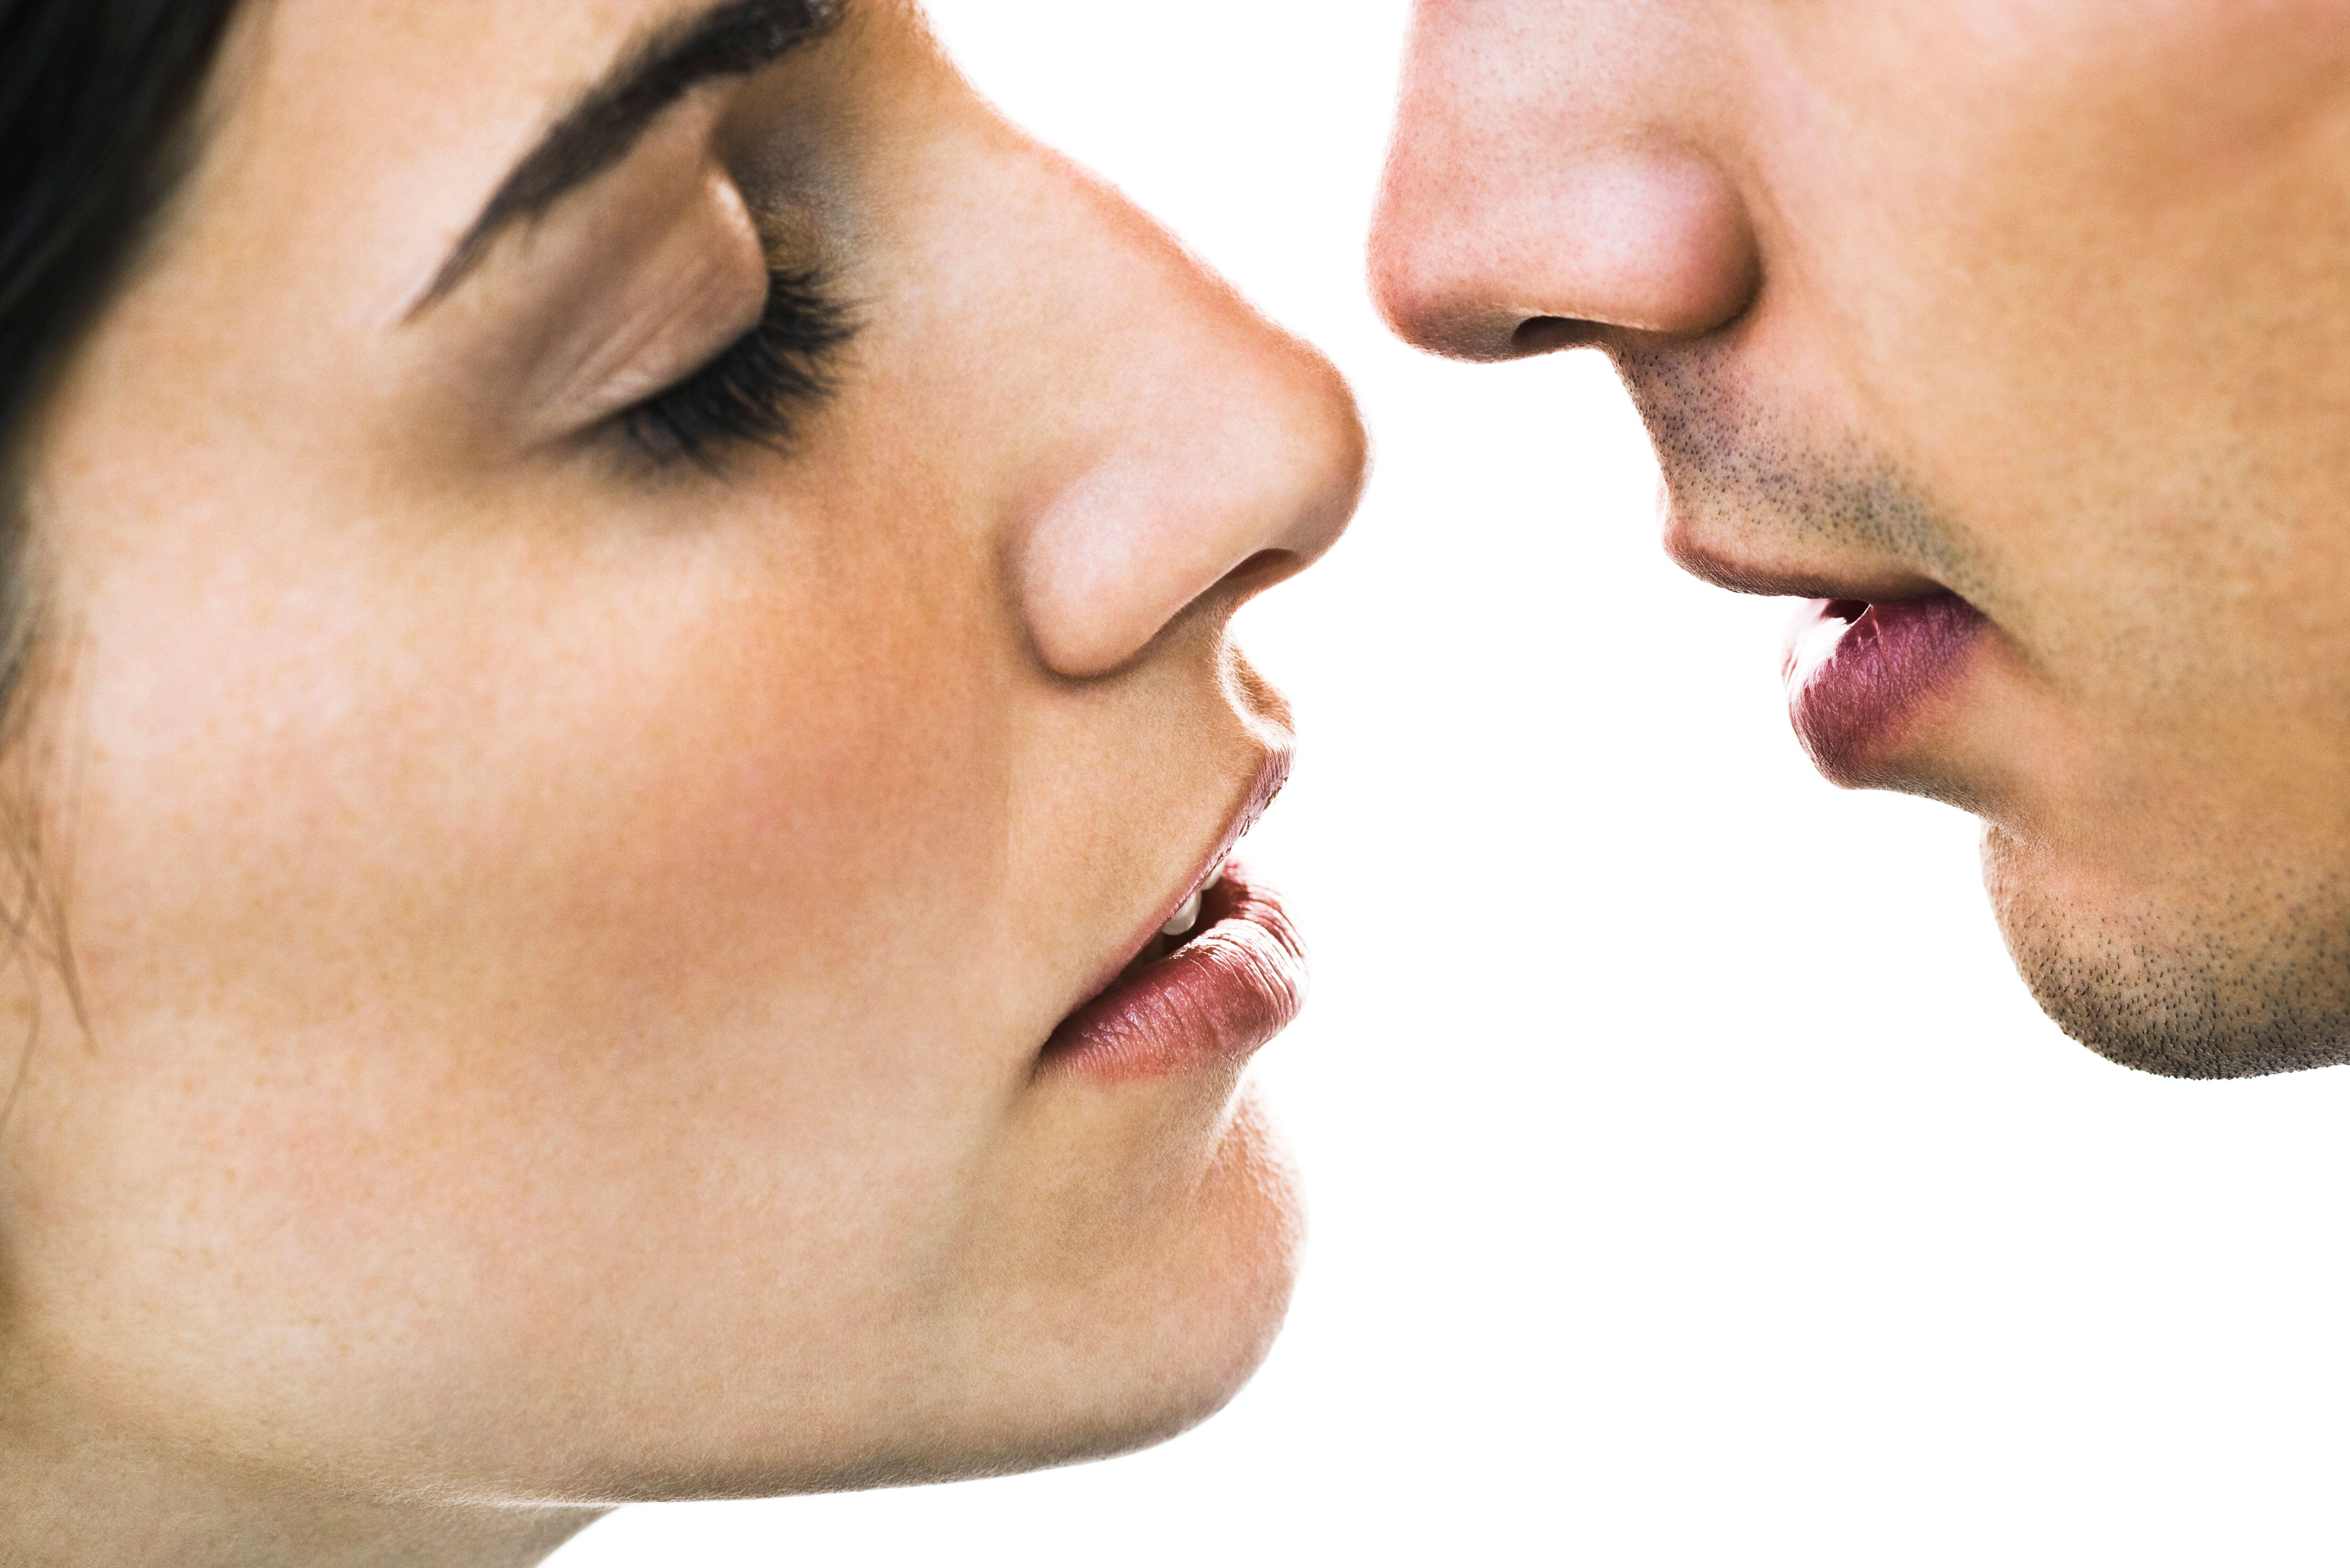 Men Can Smell When Women Are Aroused Research